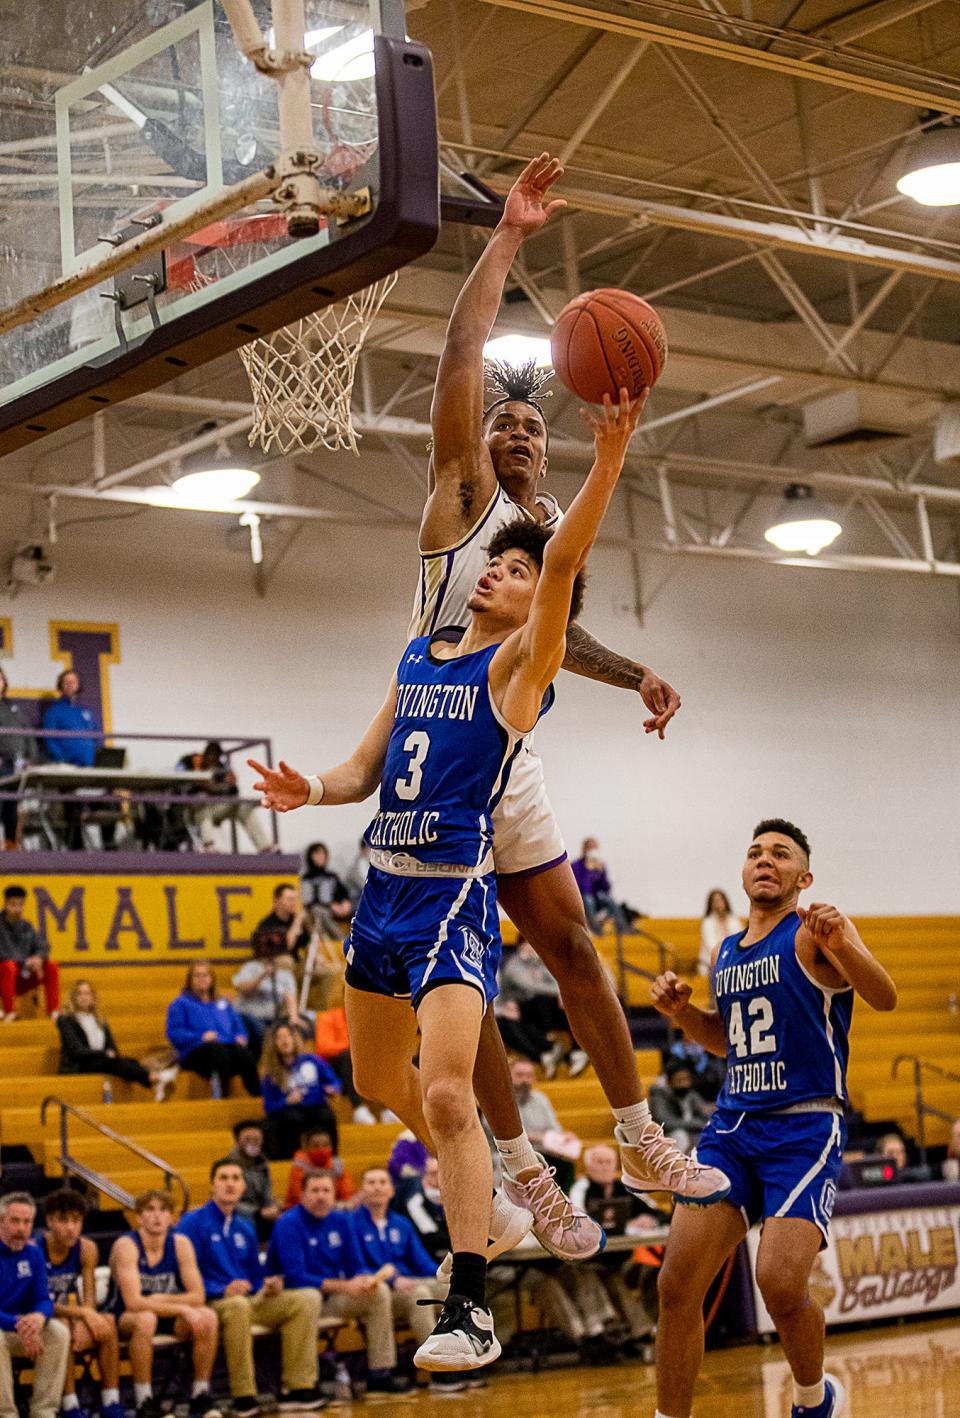 Male's Kaleb Glenn (1) rose to block a shot by Covington Catholic's James Wilson (3) during first half action Saturday afternoon at the Male High School gym. The Bulldogs went on to beat the Colonels, 73-68. January 22, 2022